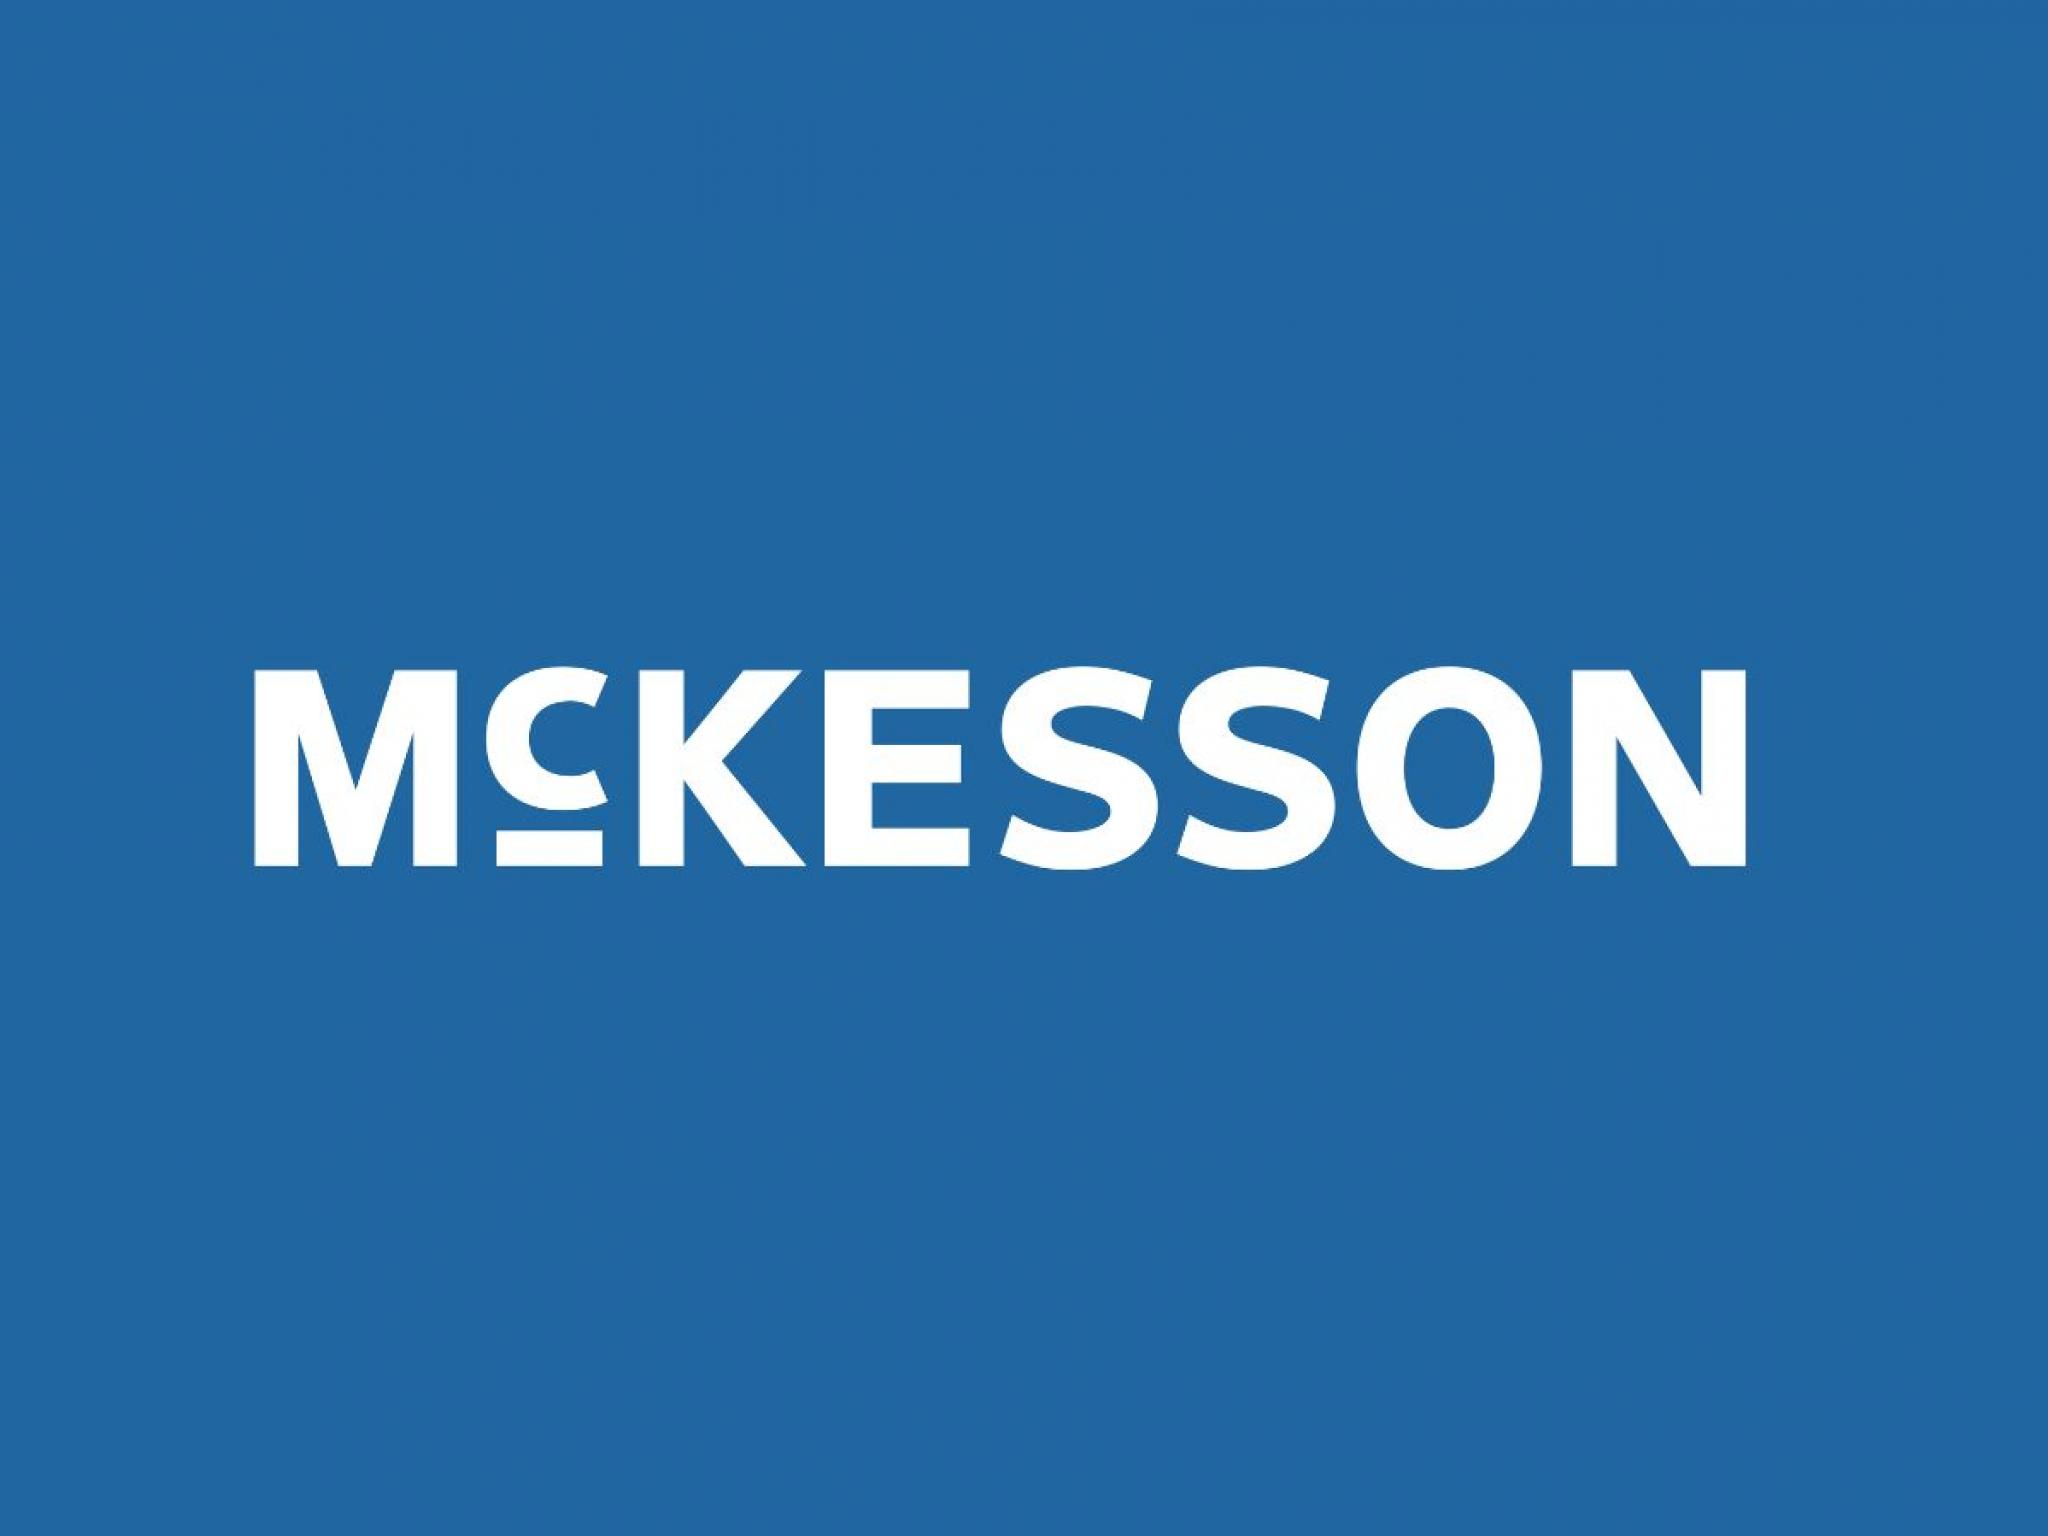  mckesson-icu-medical-novavax-and-other-big-stocks-moving-higher-on-tuesday 